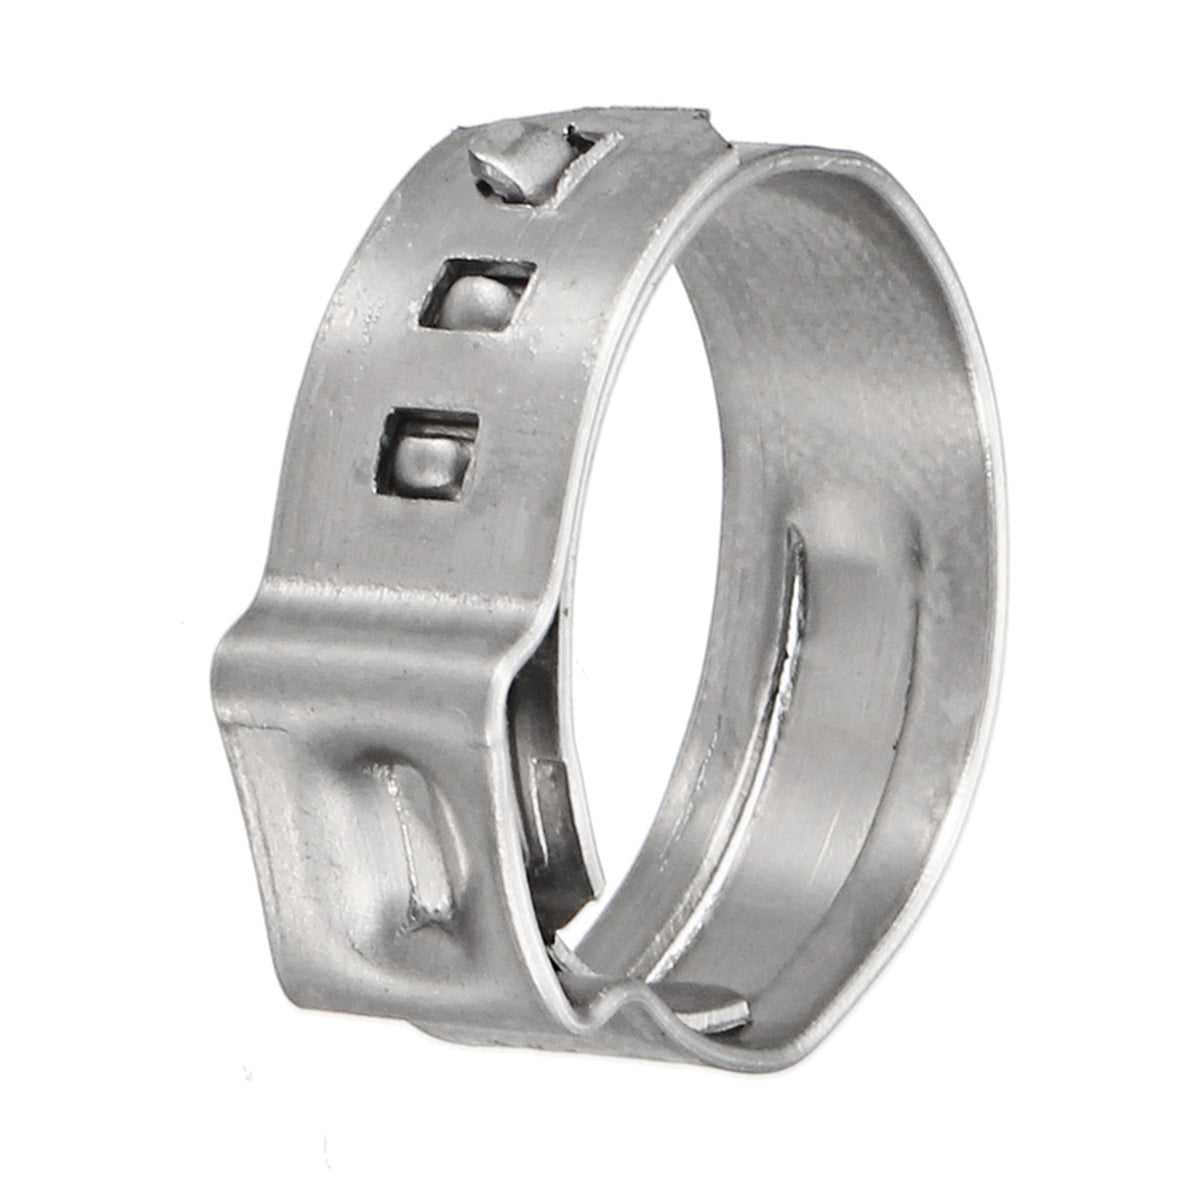 1/2inch Stainless Steel Ear PEX Clamp Cinch Rings Crimp Pinch Fitting Silver Tube - Auto GoShop